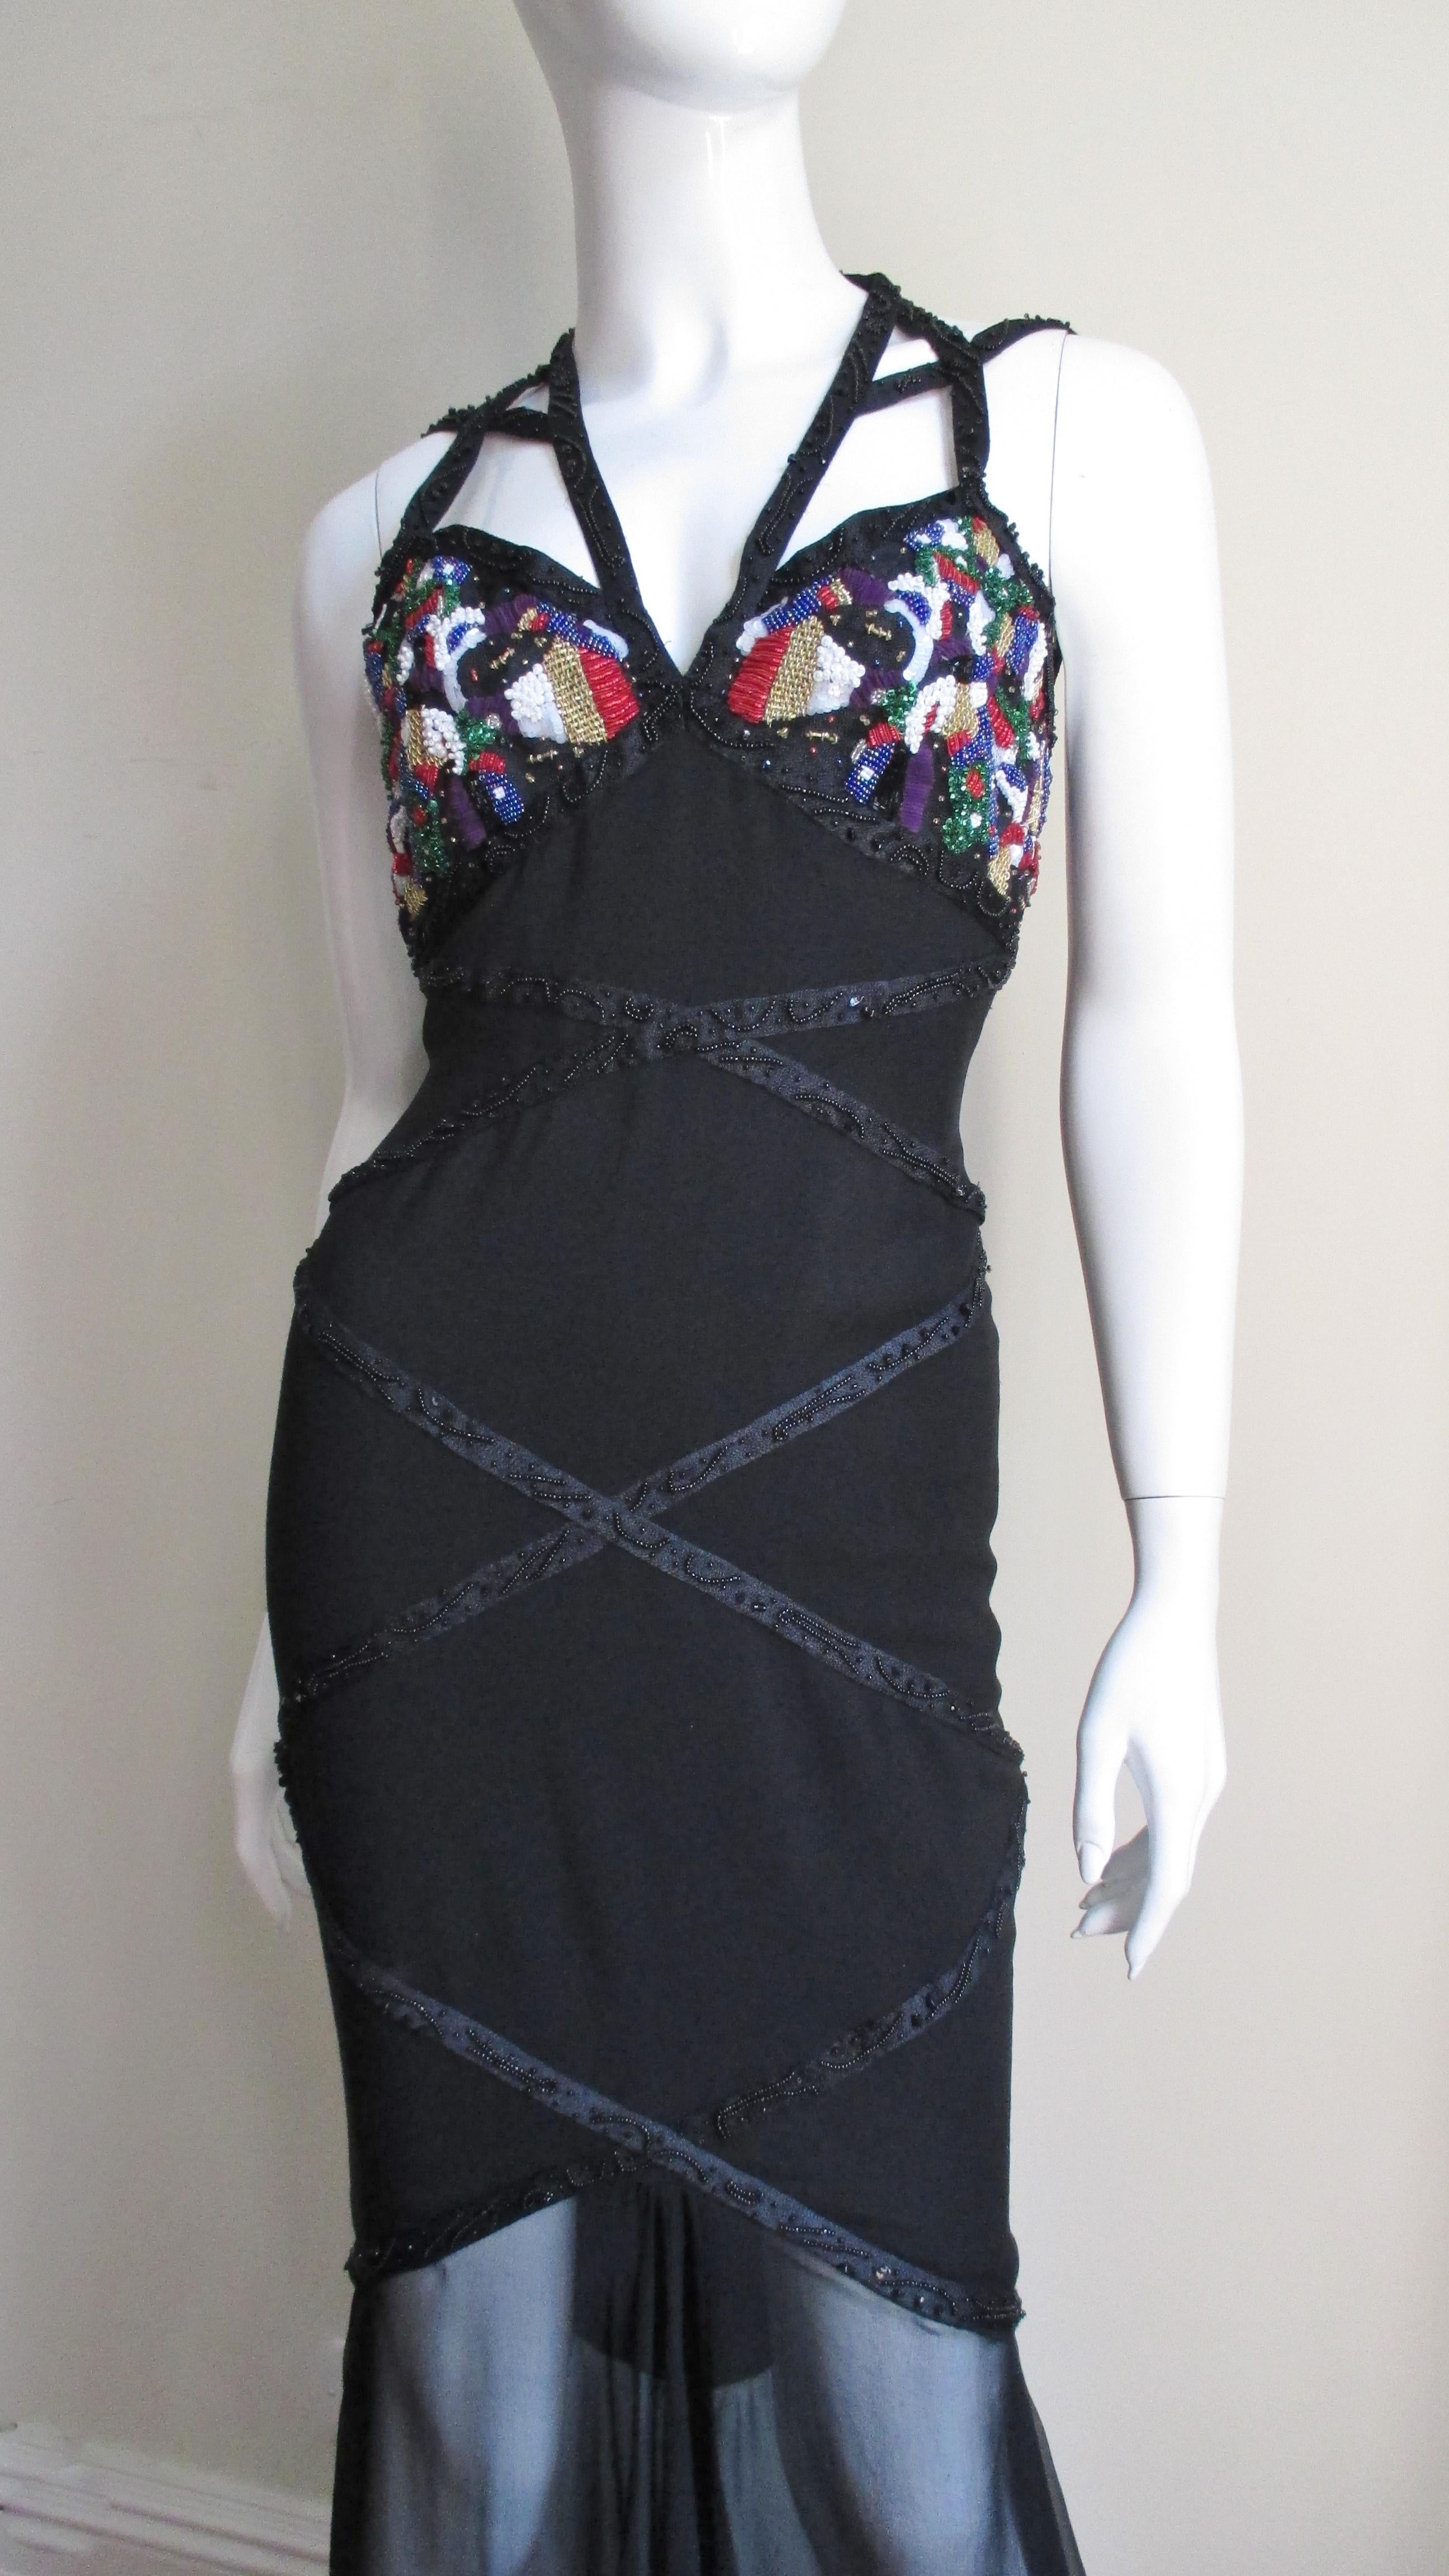  Karl Lagerfeld Silk SS 1993 Ad Campaign Halter Gown with Beading In Excellent Condition For Sale In Water Mill, NY